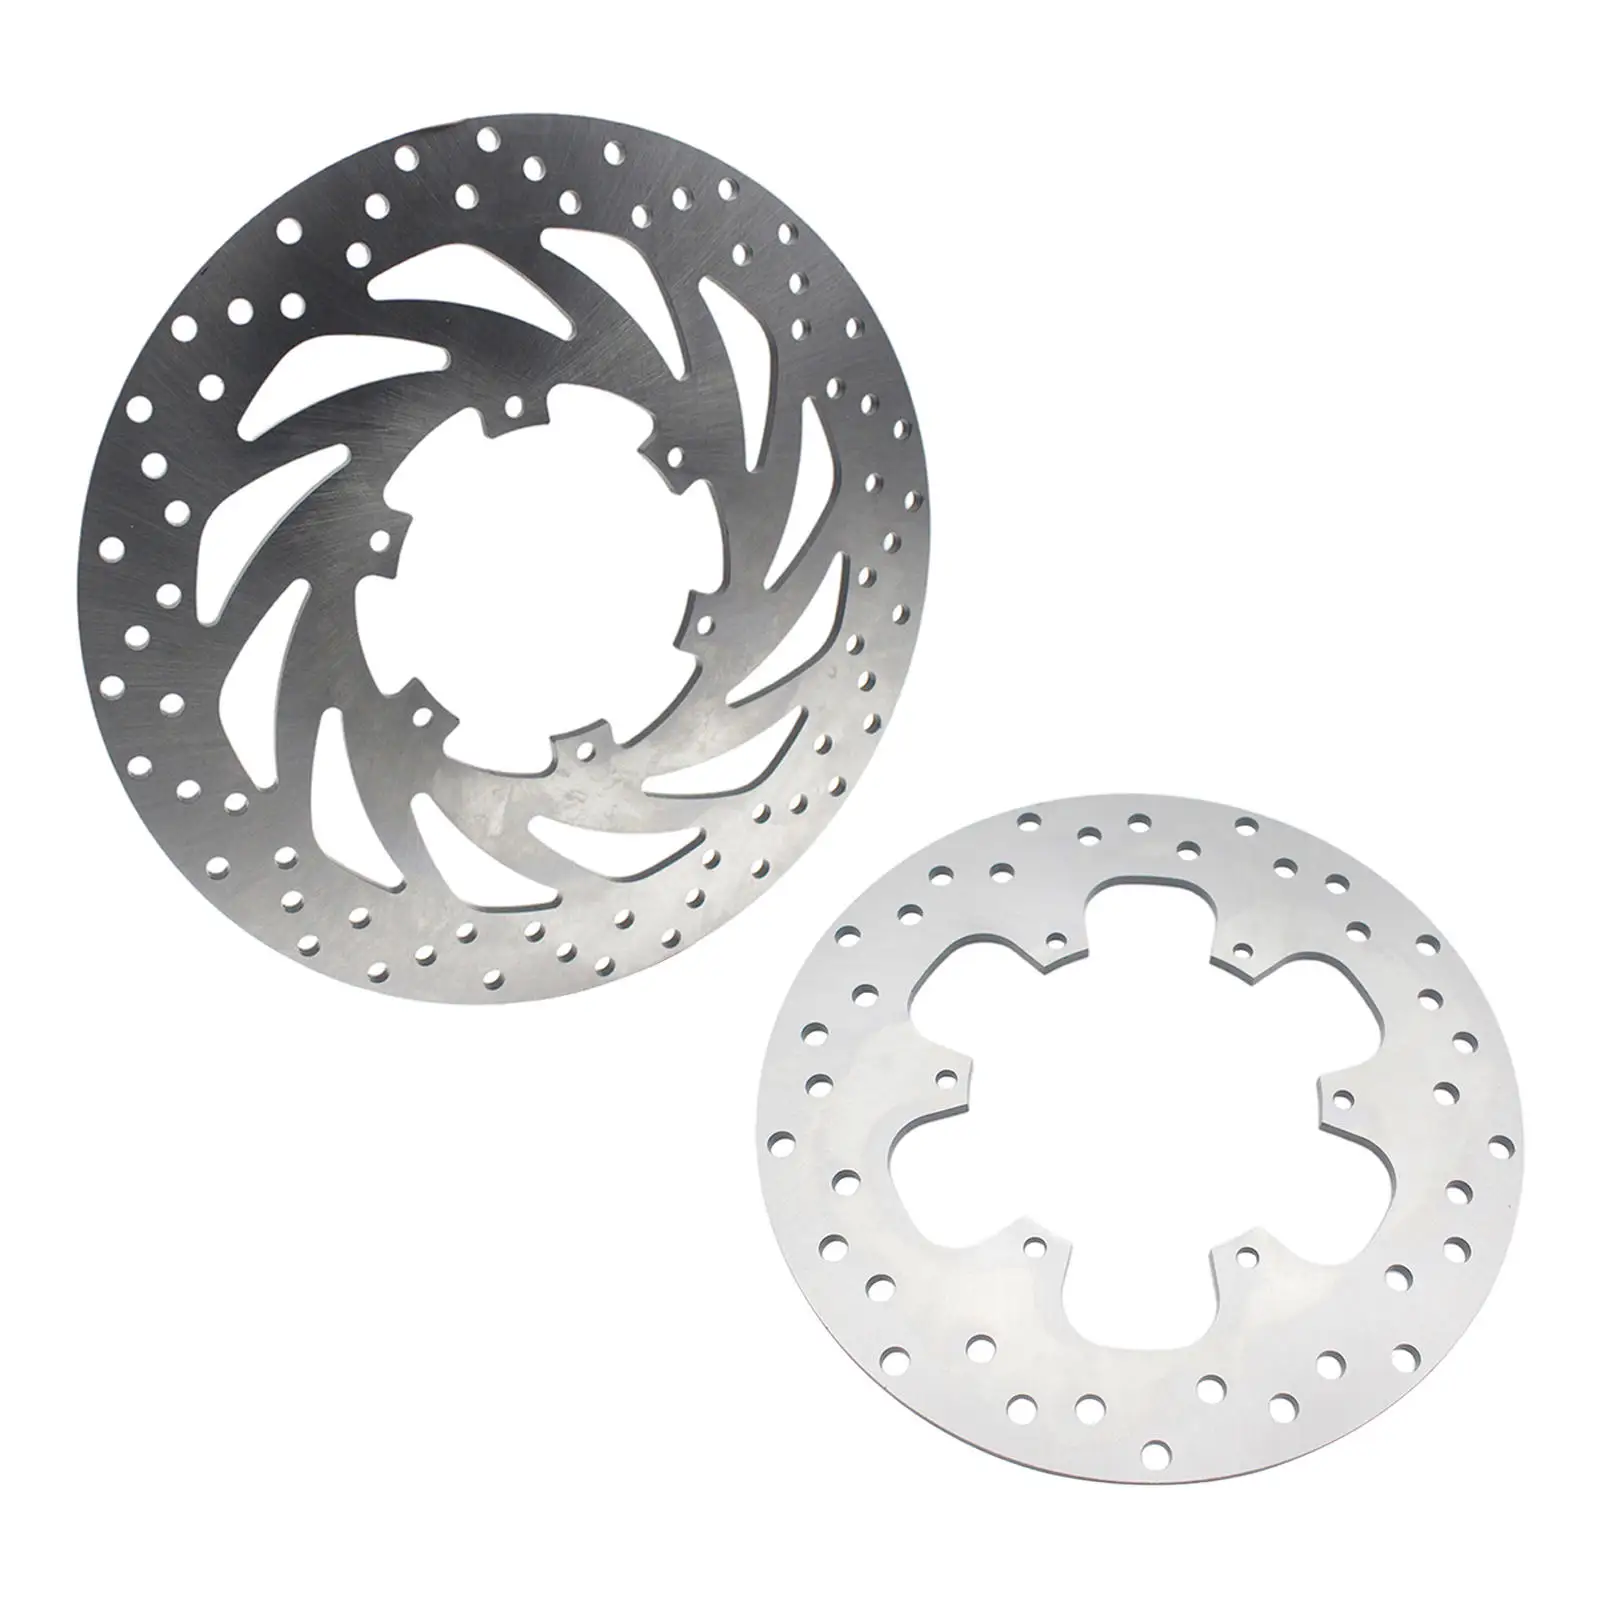 Motorcycle Brake Disc Rotor with Drilled Holes Pad for BMW F 650 GS ST CS 1993-2009 Brake System Smooth and Quiet Braking